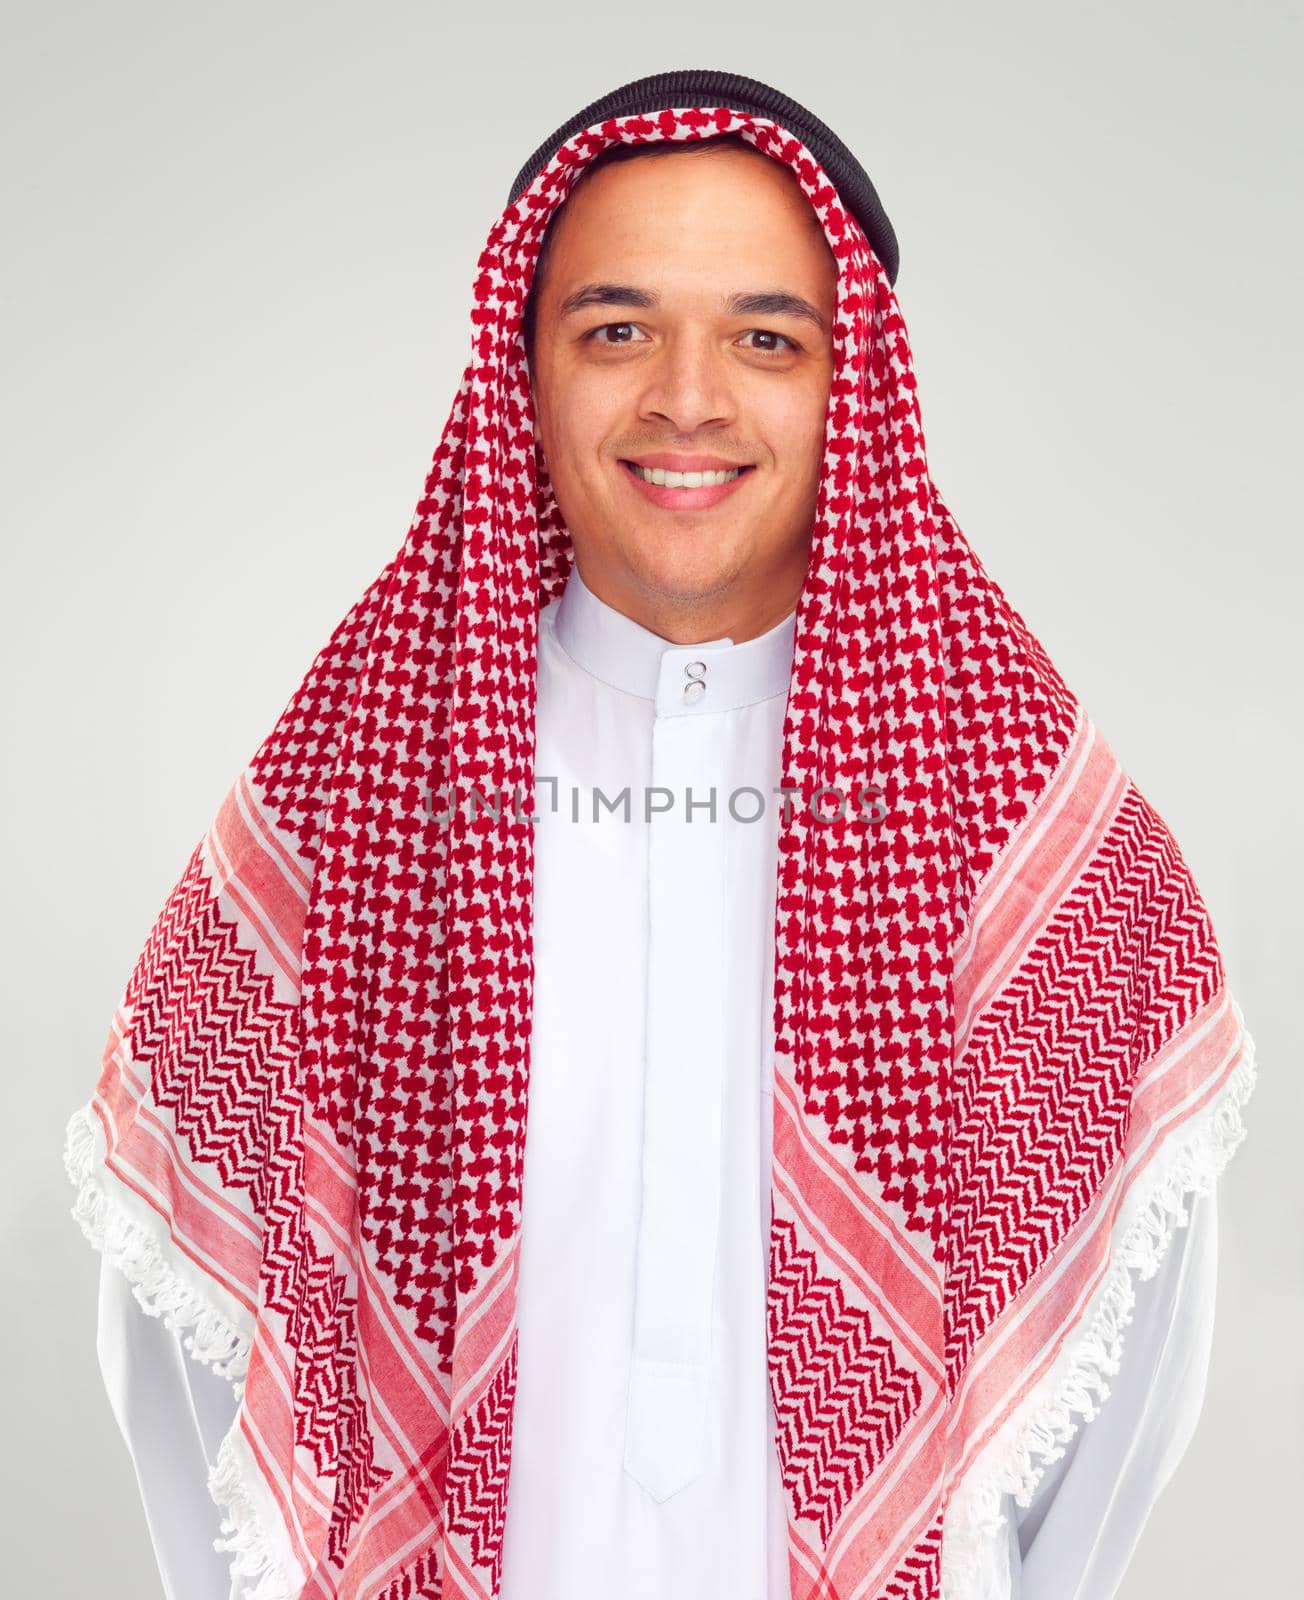 Traditional pride. Studio portrait of a young arabic man in a keffiyeh